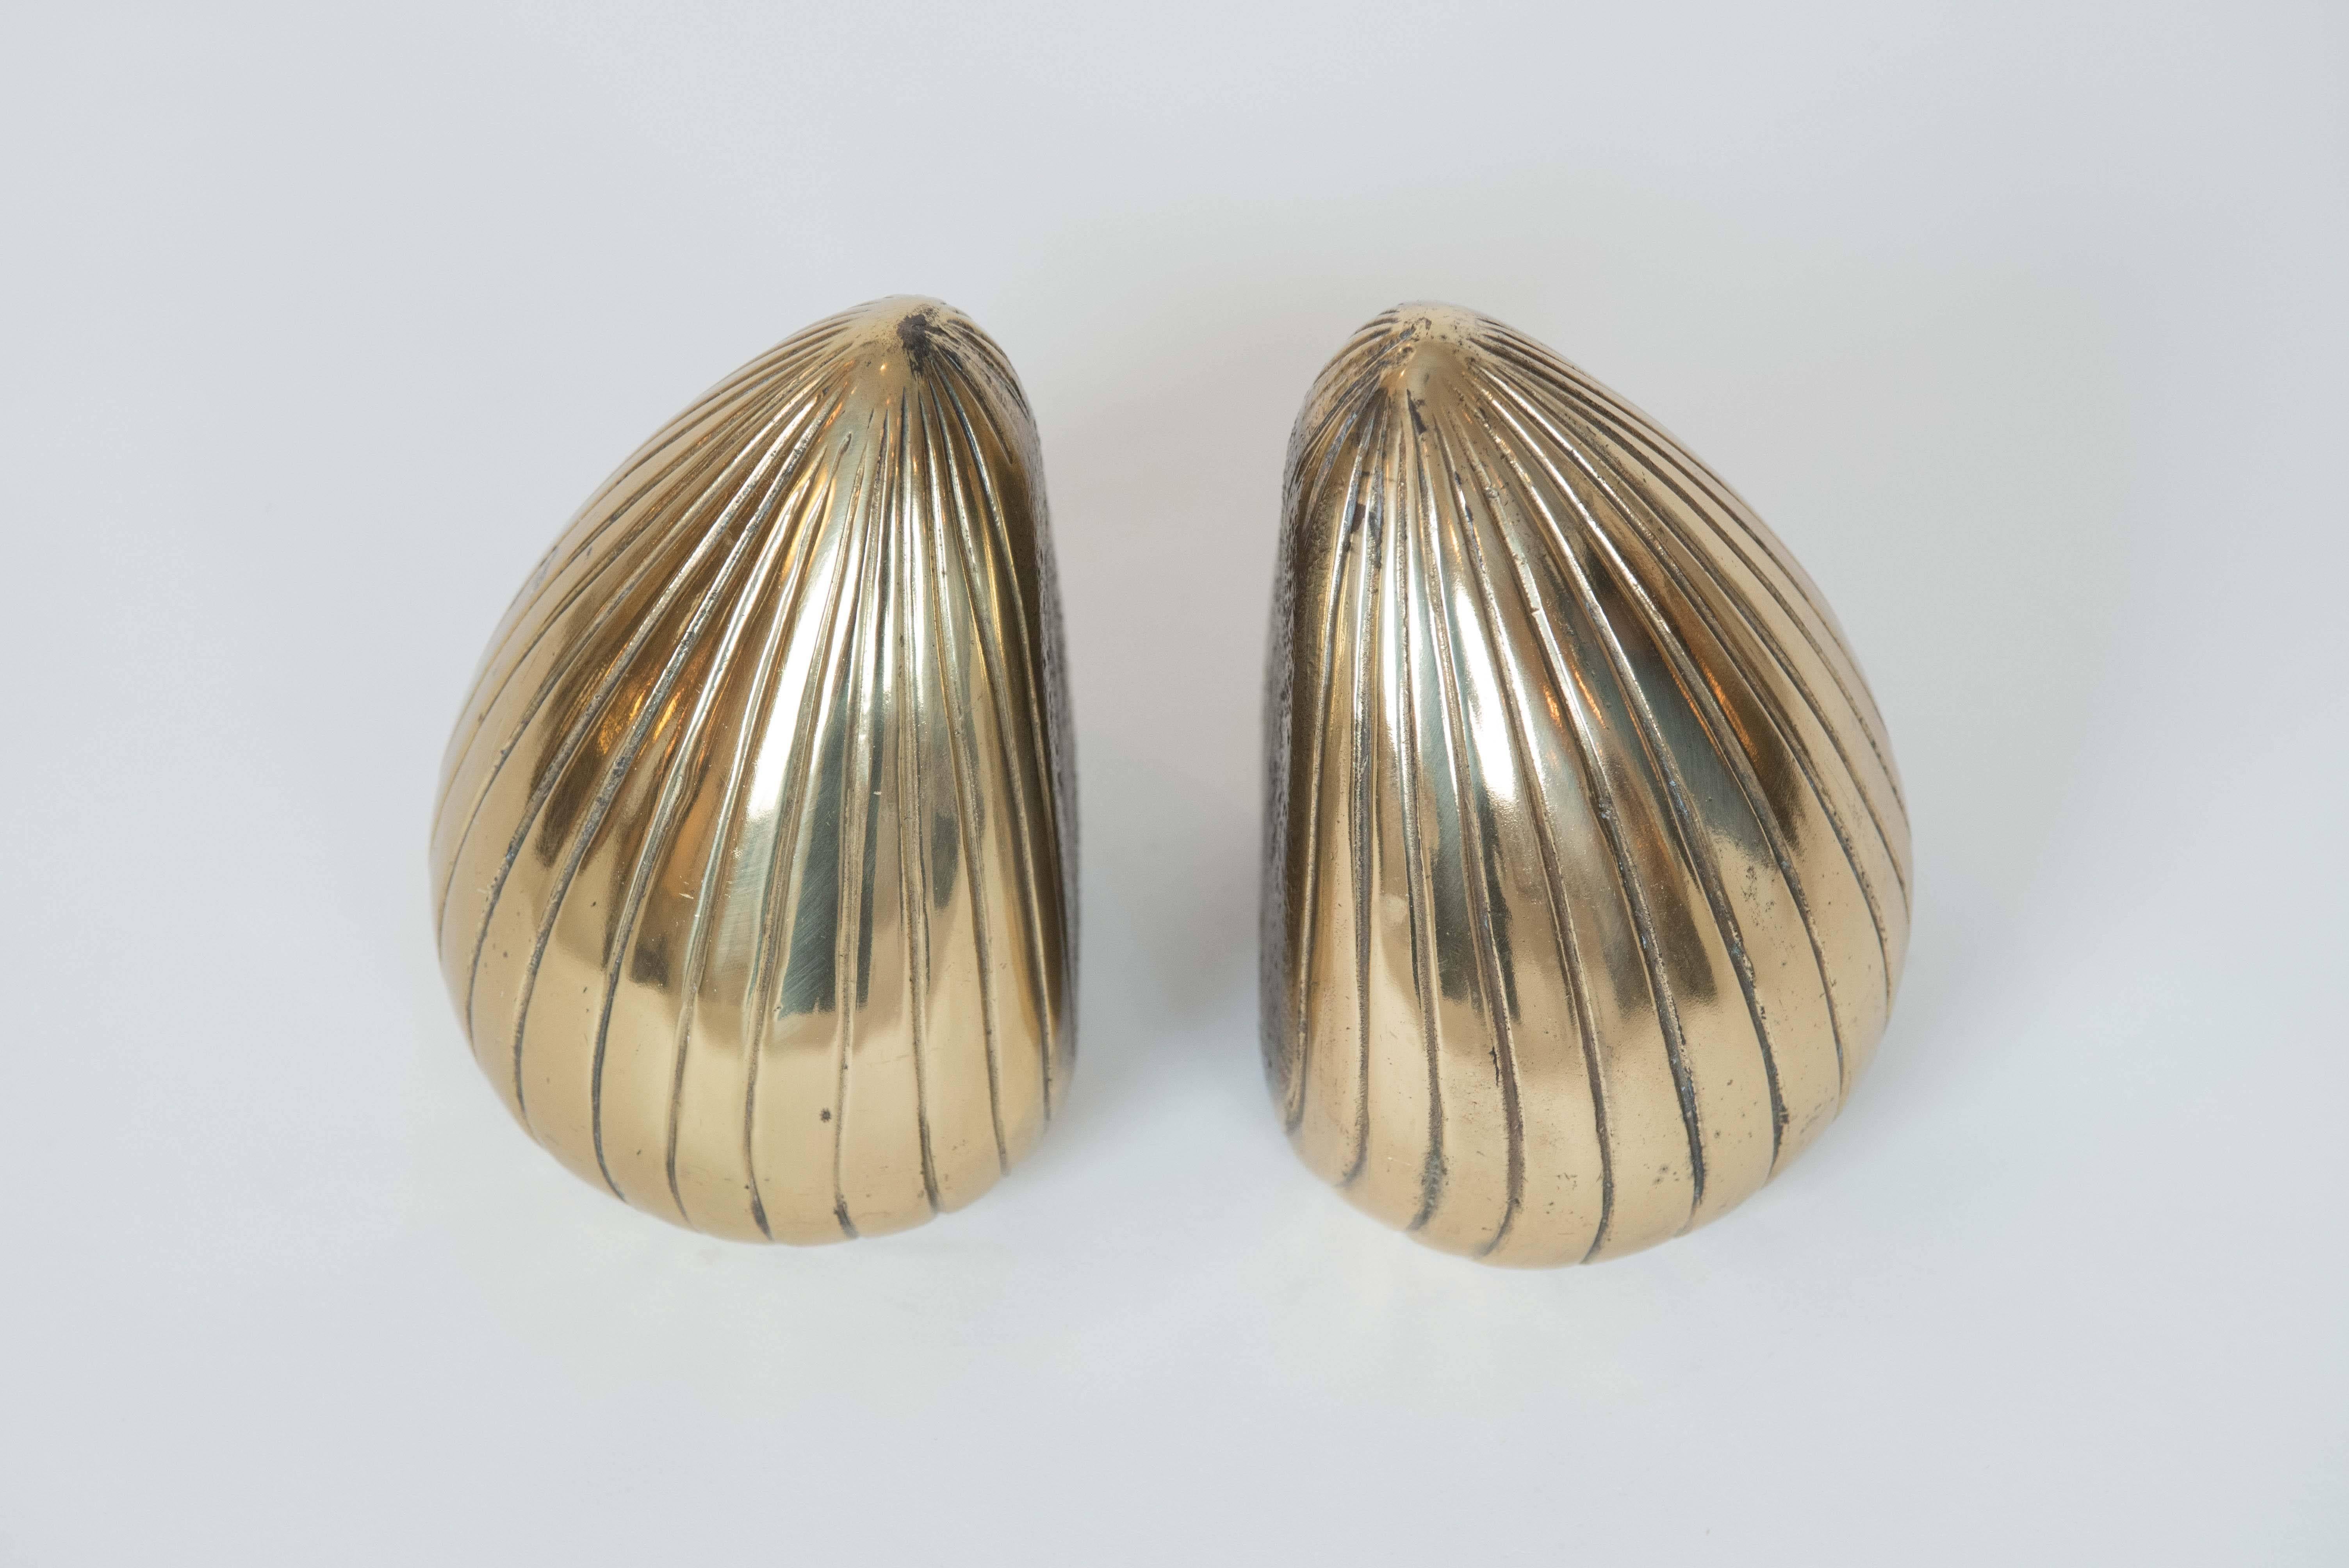 These Classic brass Ben Seibel bookends have been lightly polished and
have a lovely sculptural quality to them.